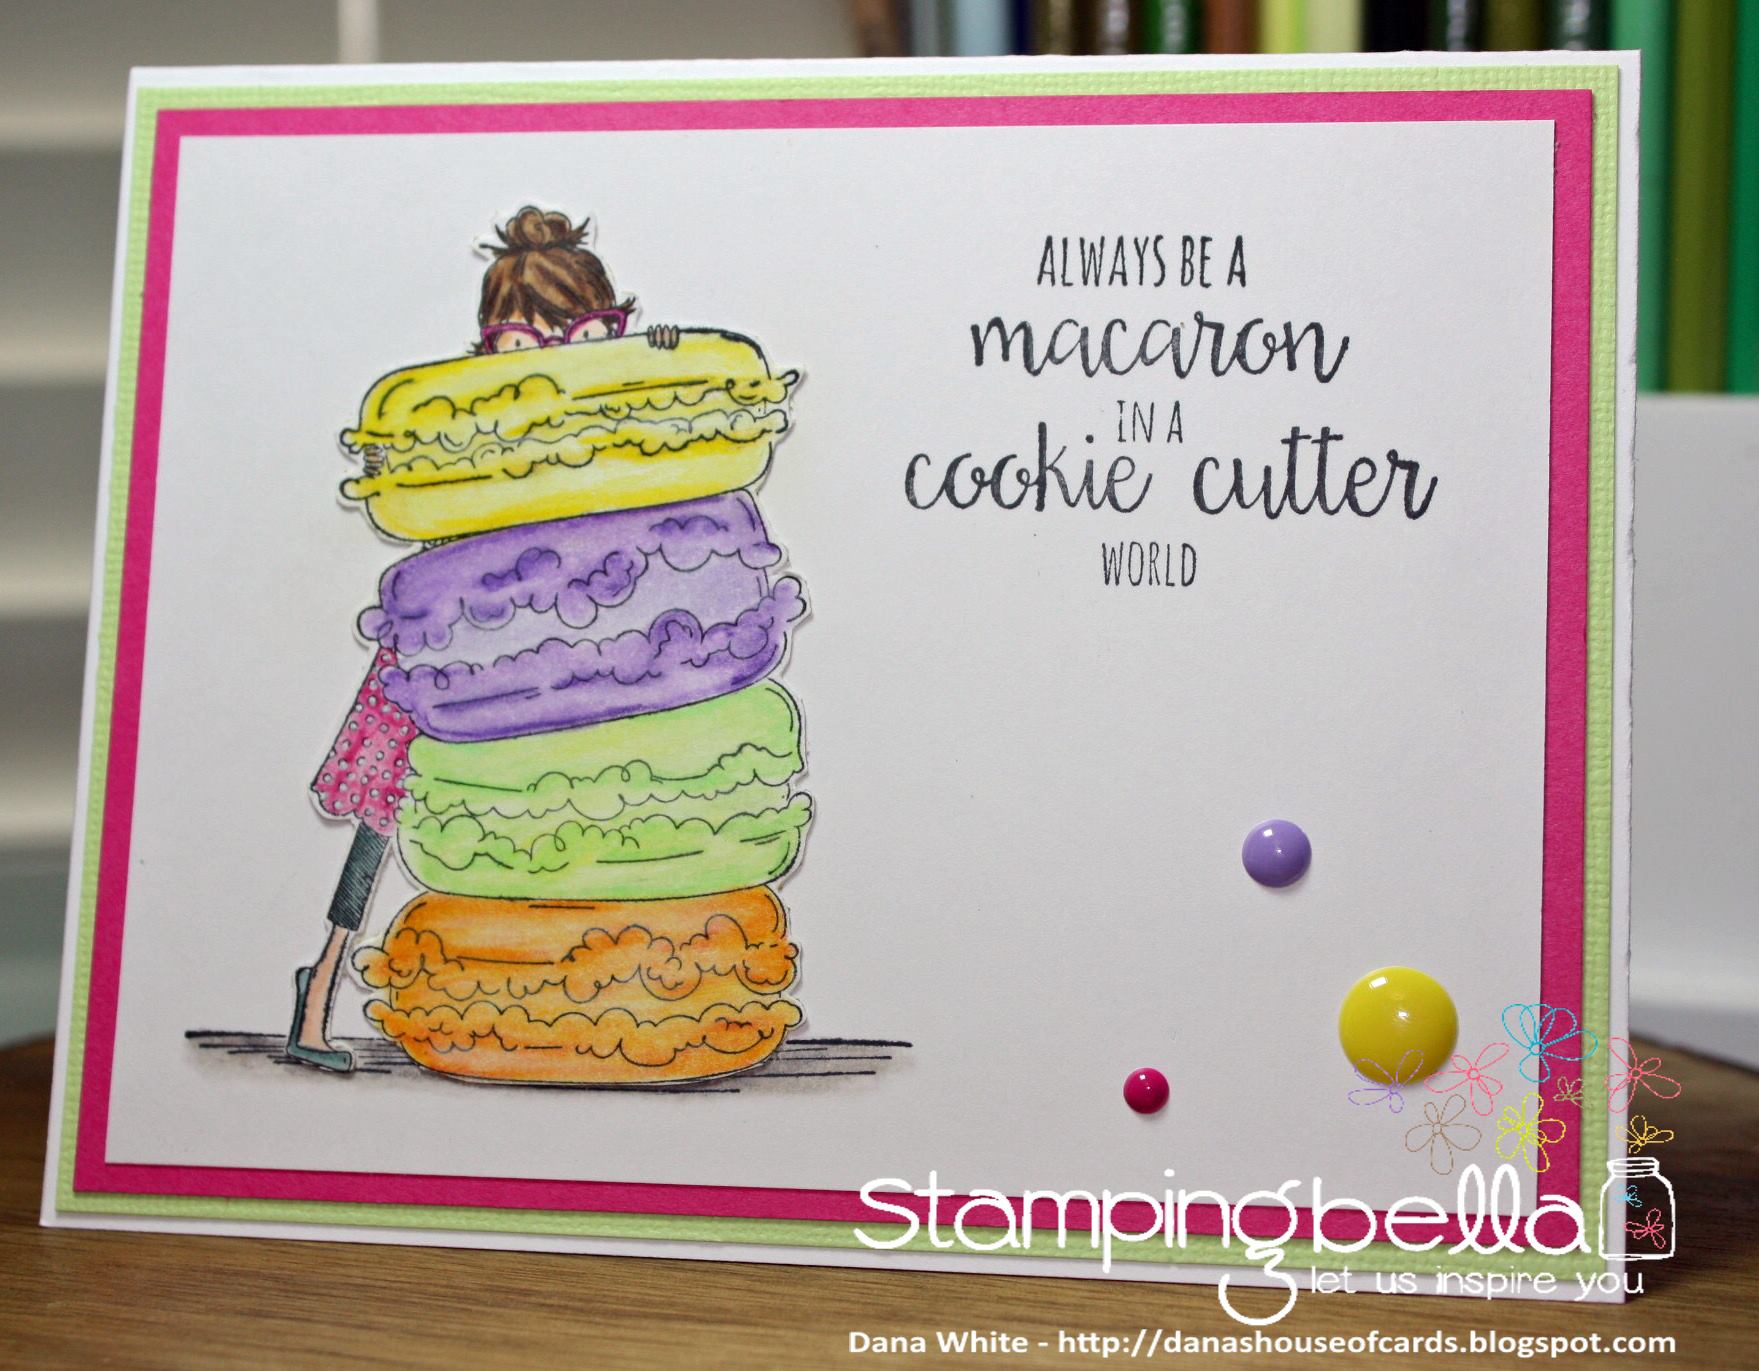 Bellarific Friday with STAMPING BELLA August 25th 2017. Rubber stamp used TINY TOWNIE MONIQUE LOVES MACARONS.  Card made by DANA WHITE